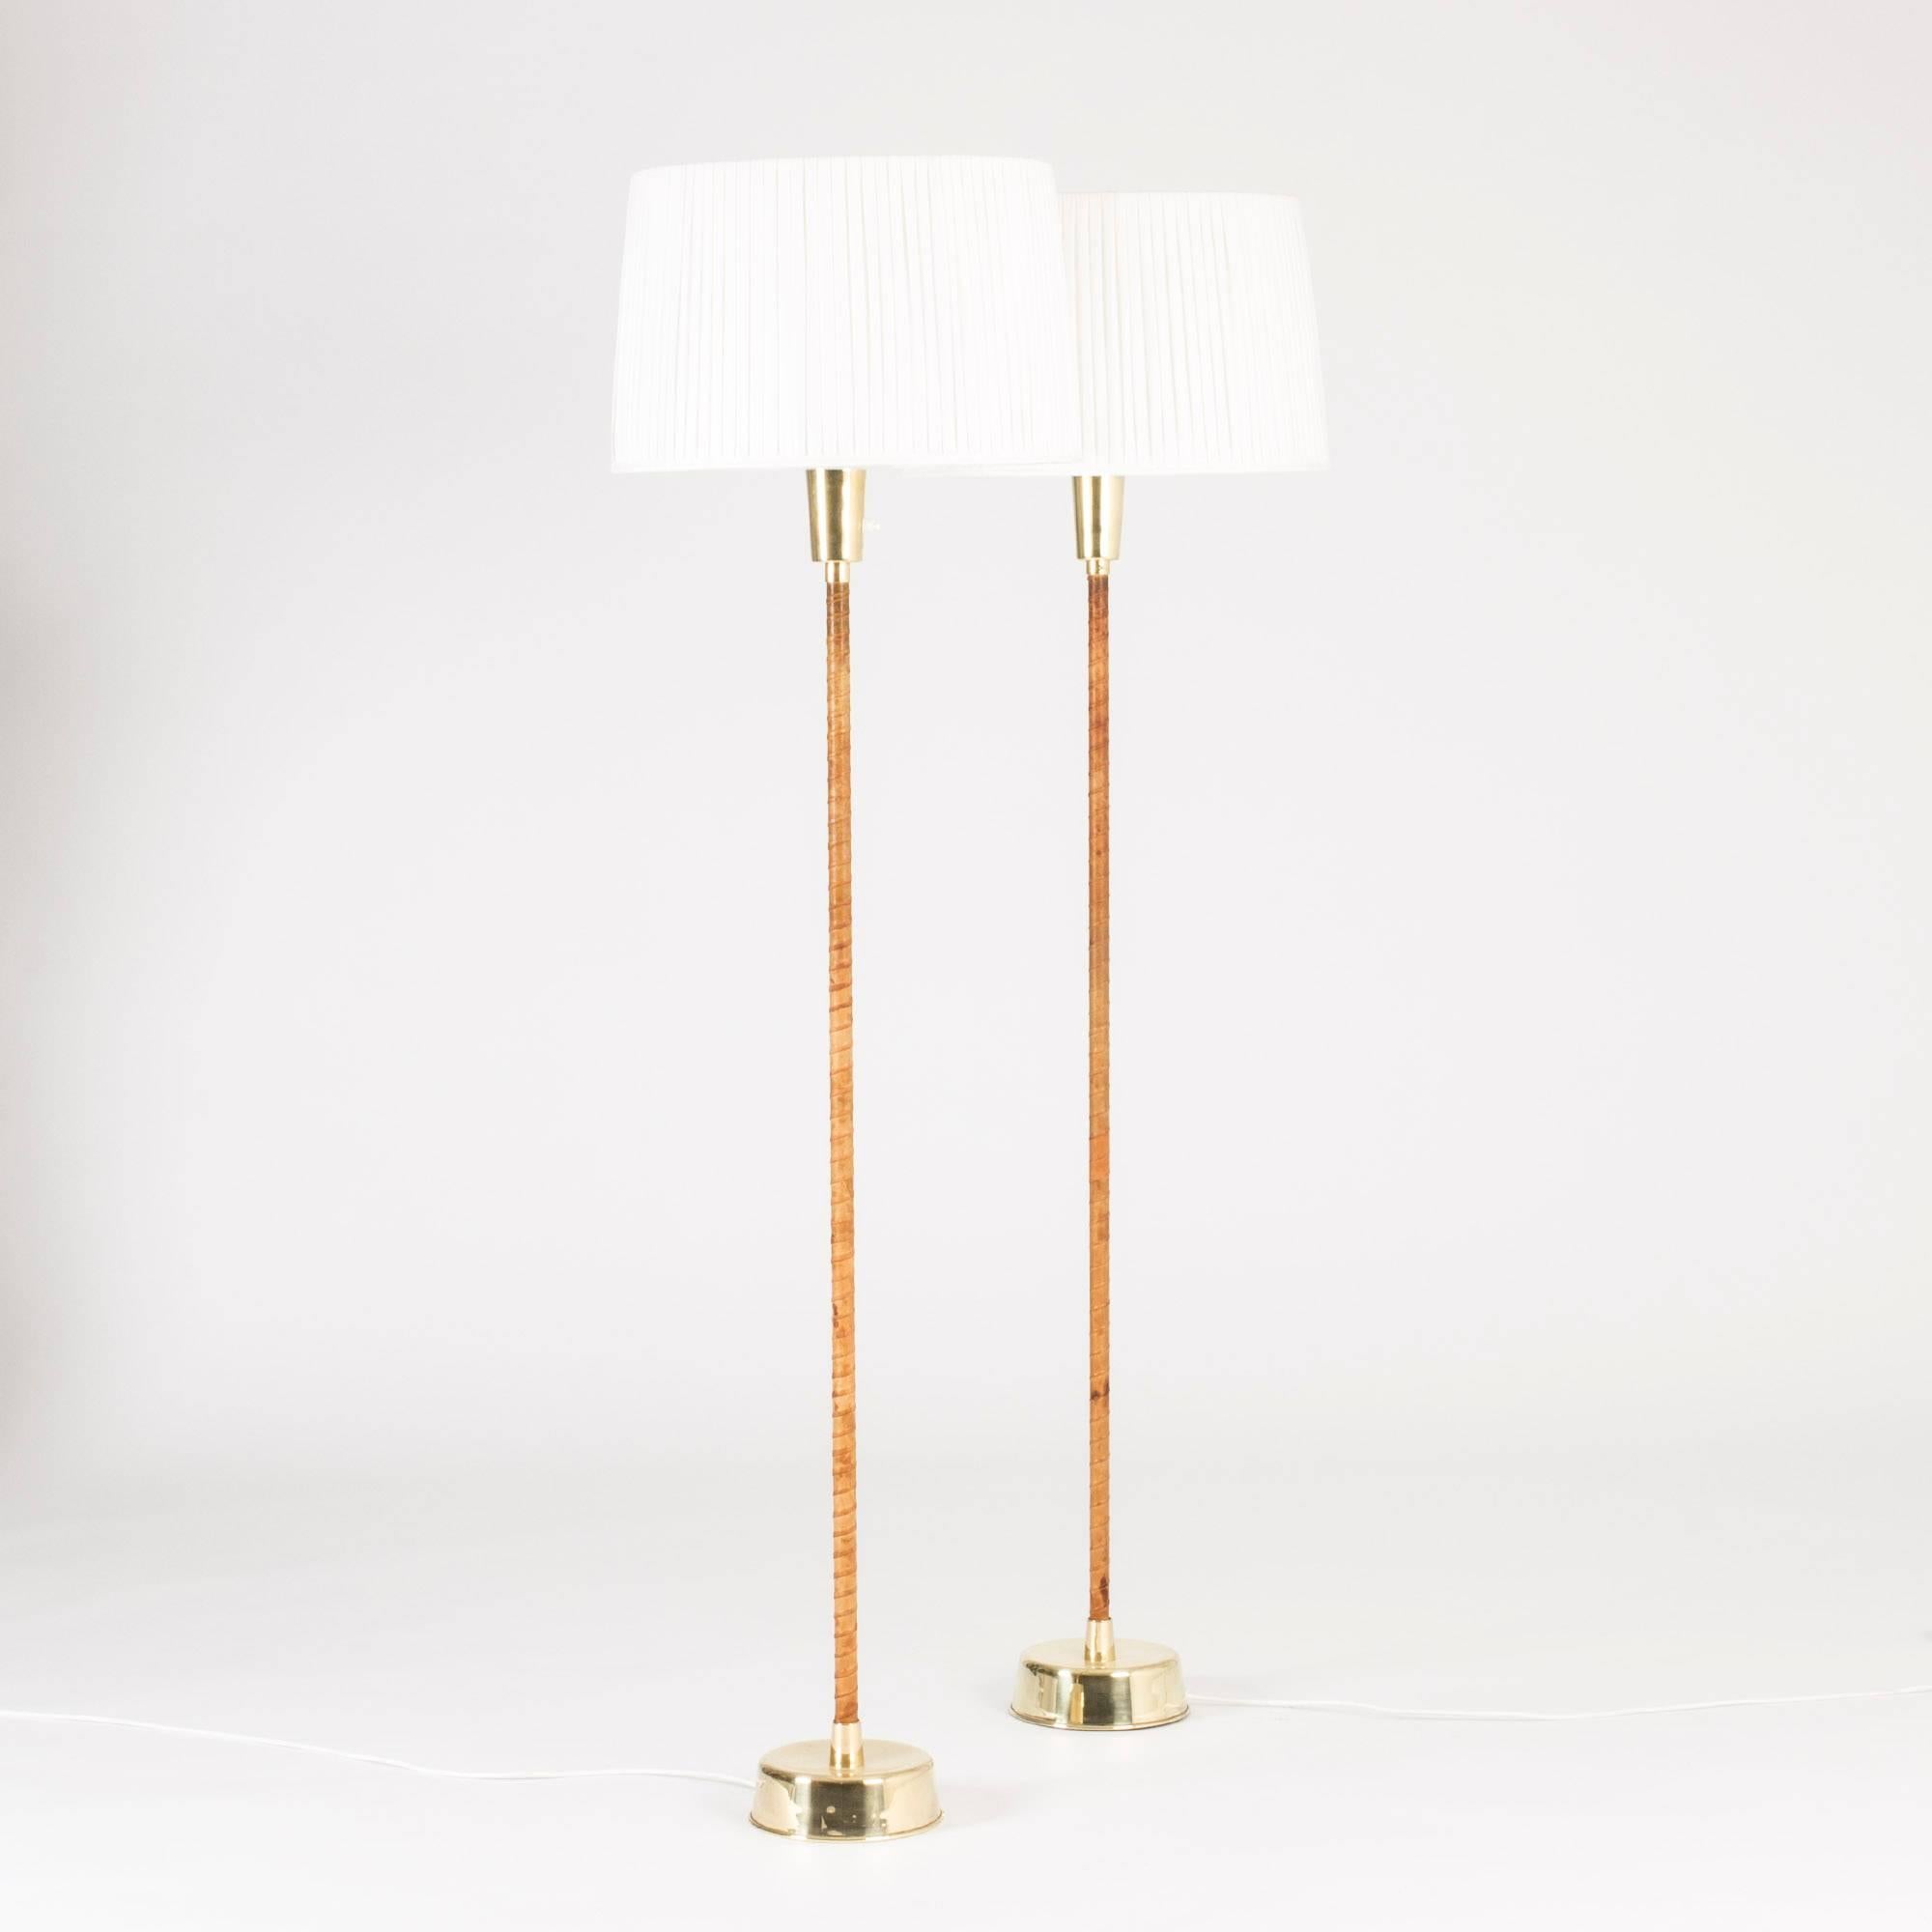 Pair of floor lamps by Lisa Johansson-Pape, striking in their poised simplicity. Brass bases and brown leather wound handles, voluminous white lamp shades.